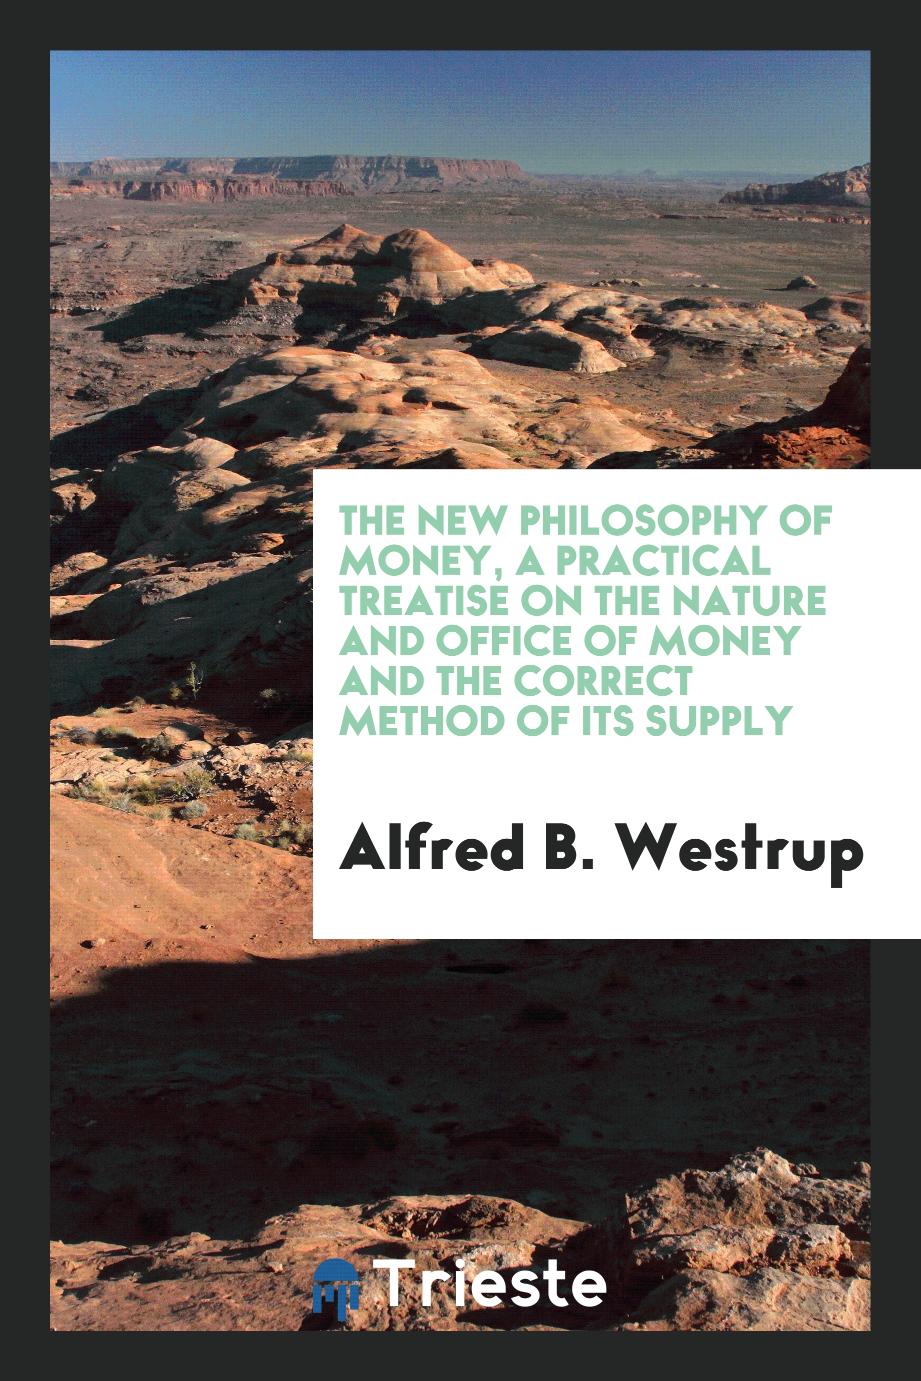 The New Philosophy of Money, a Practical Treatise on the Nature and Office of Money and the Correct Method of Its Supply